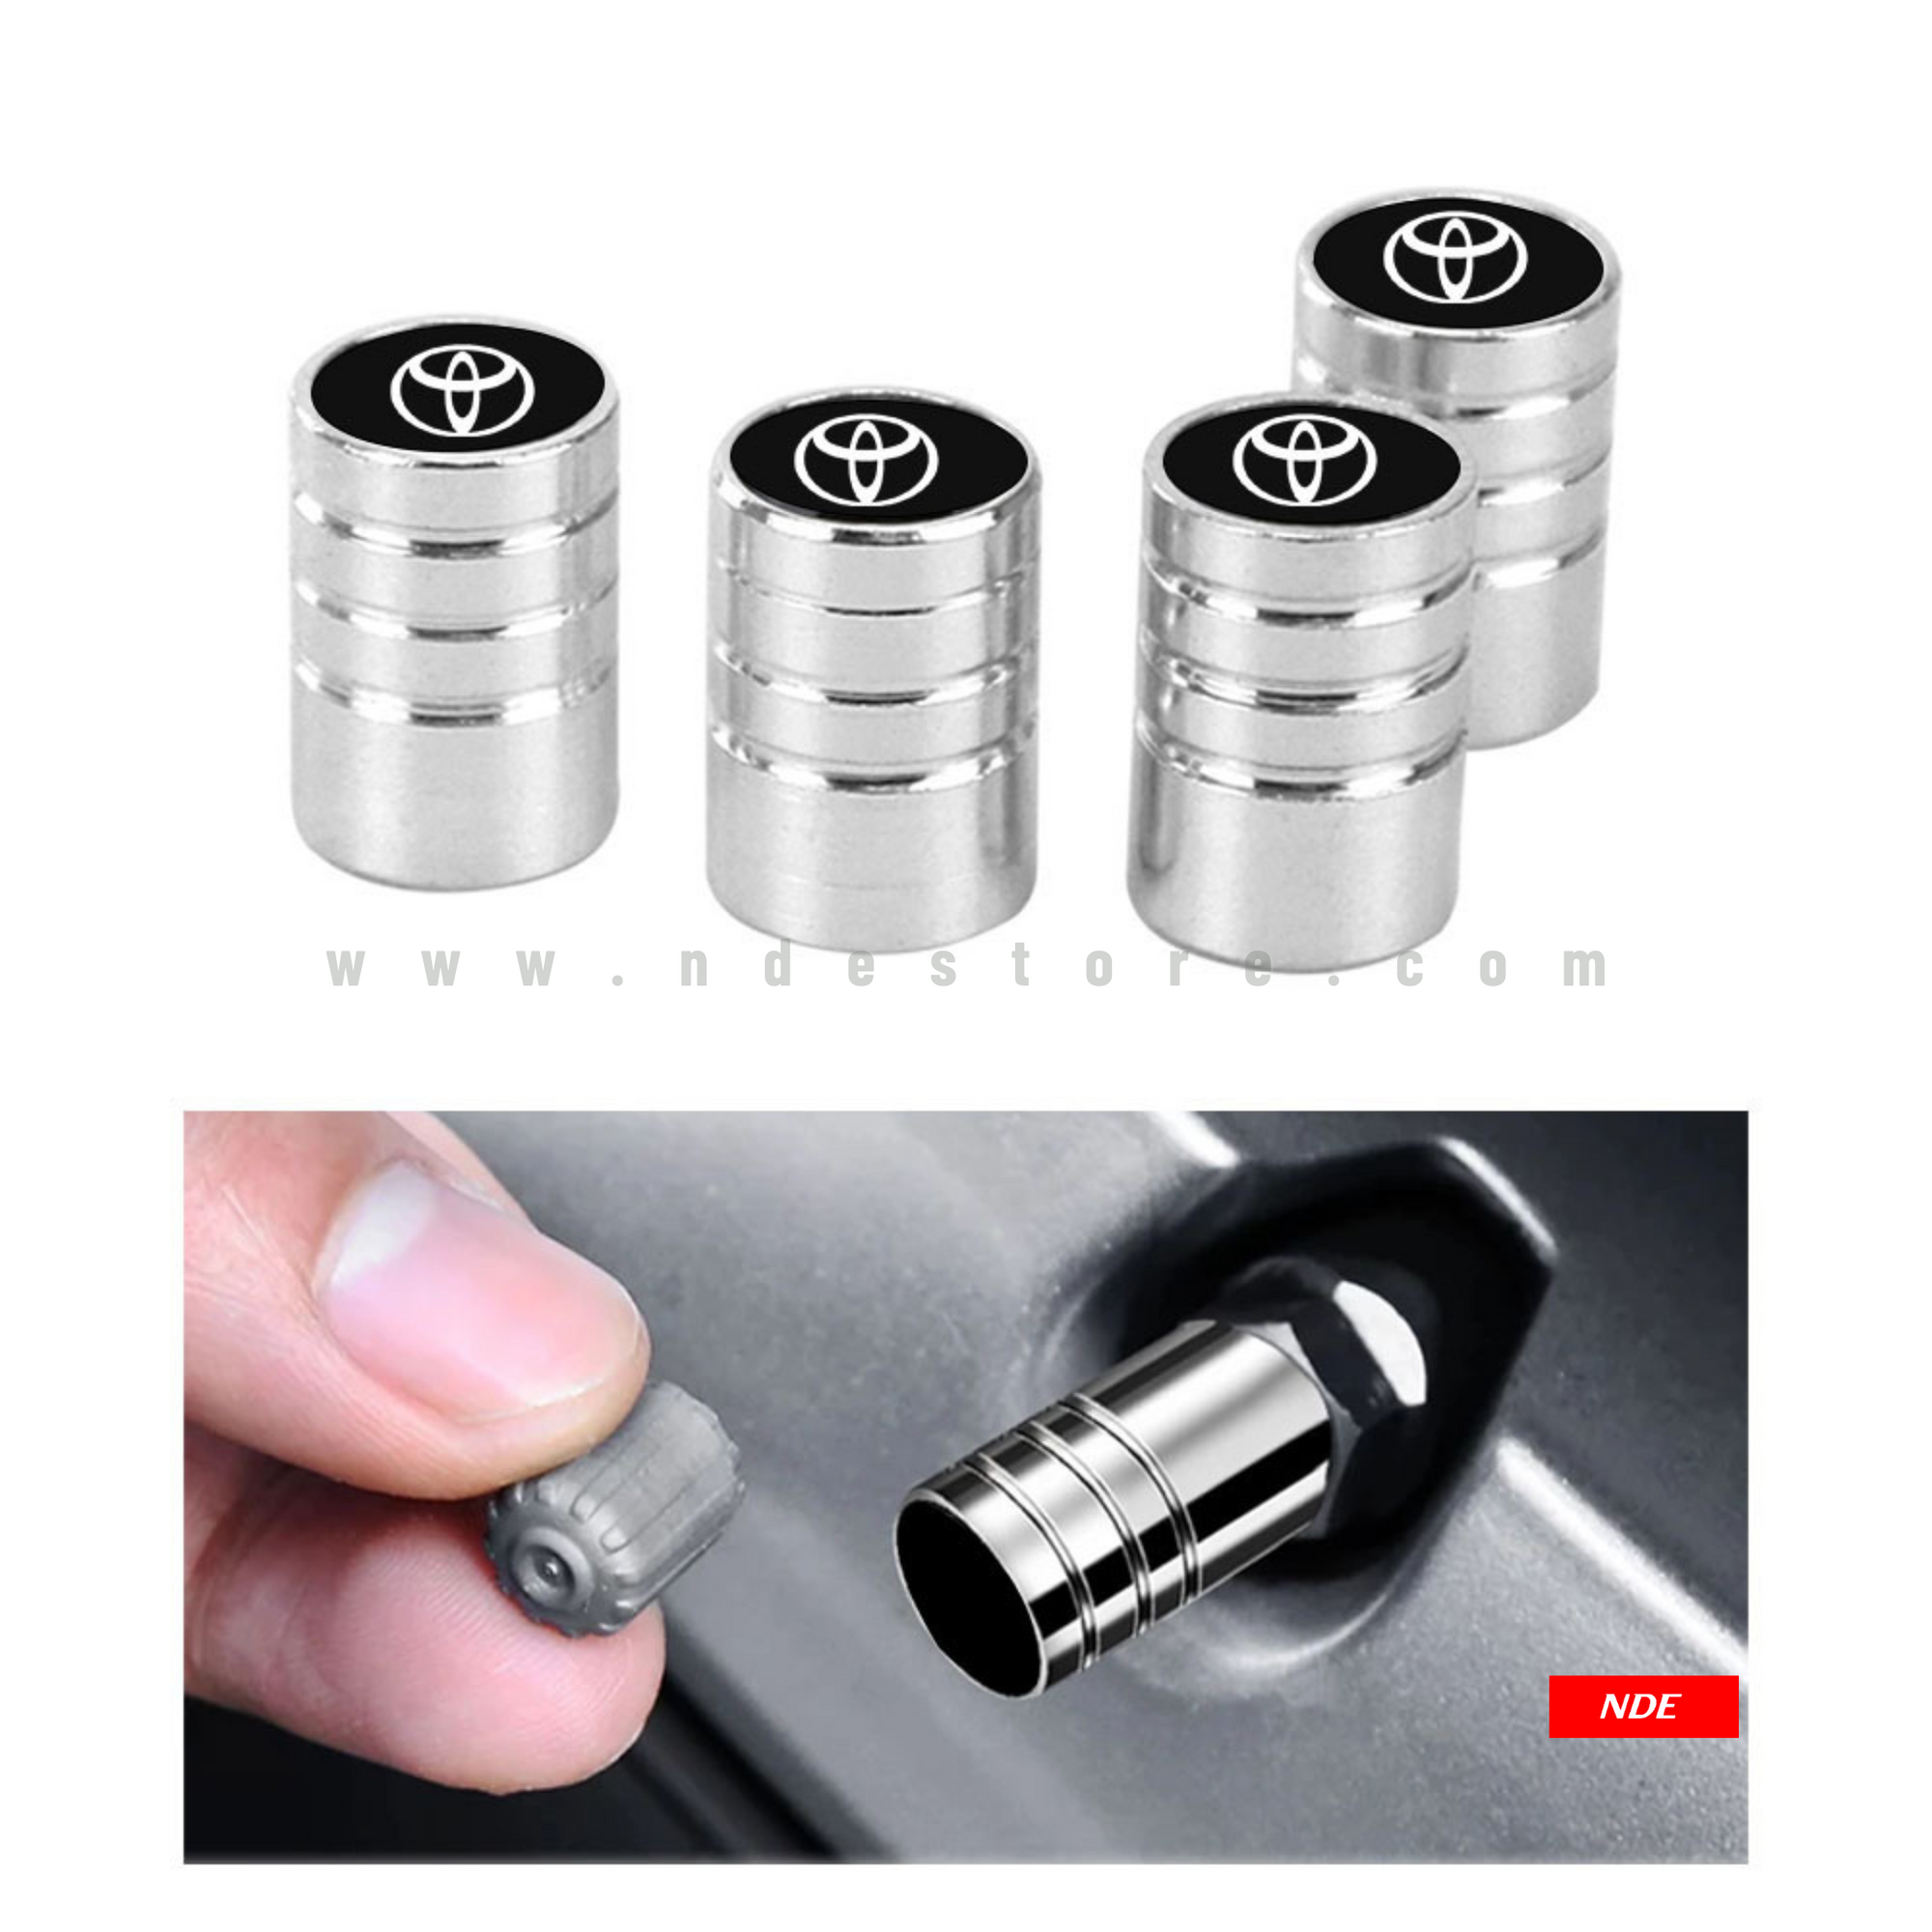 TIRE NOZZLE COVER CAR WHEEL VALVE COVER WITH TOYOTA LOGO